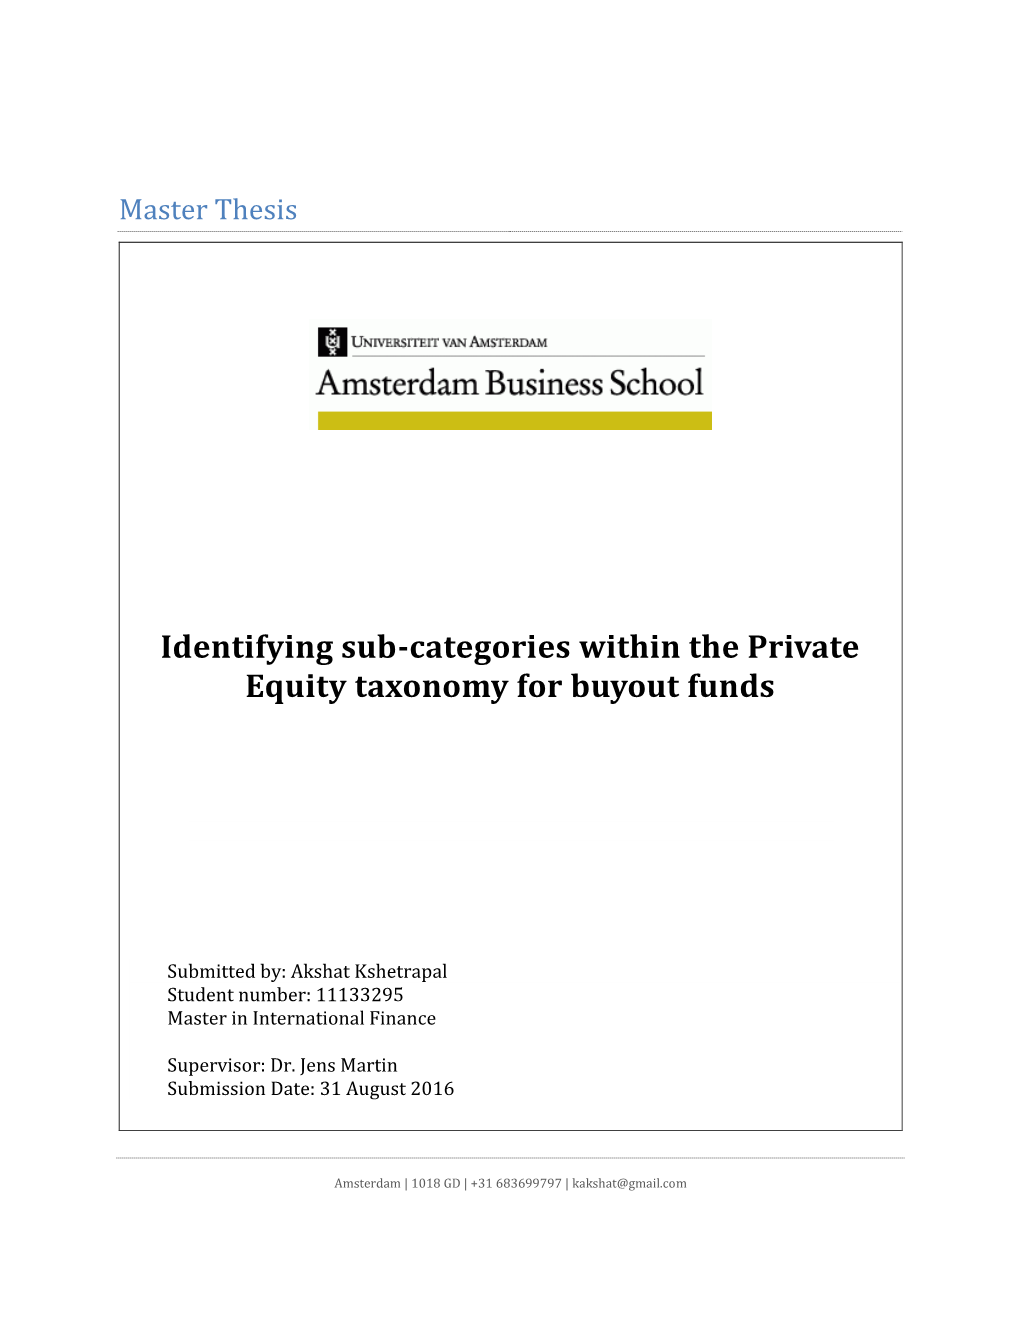 Identifying Sub-Categories Within the Private Equity Taxonomy for Buyout Funds